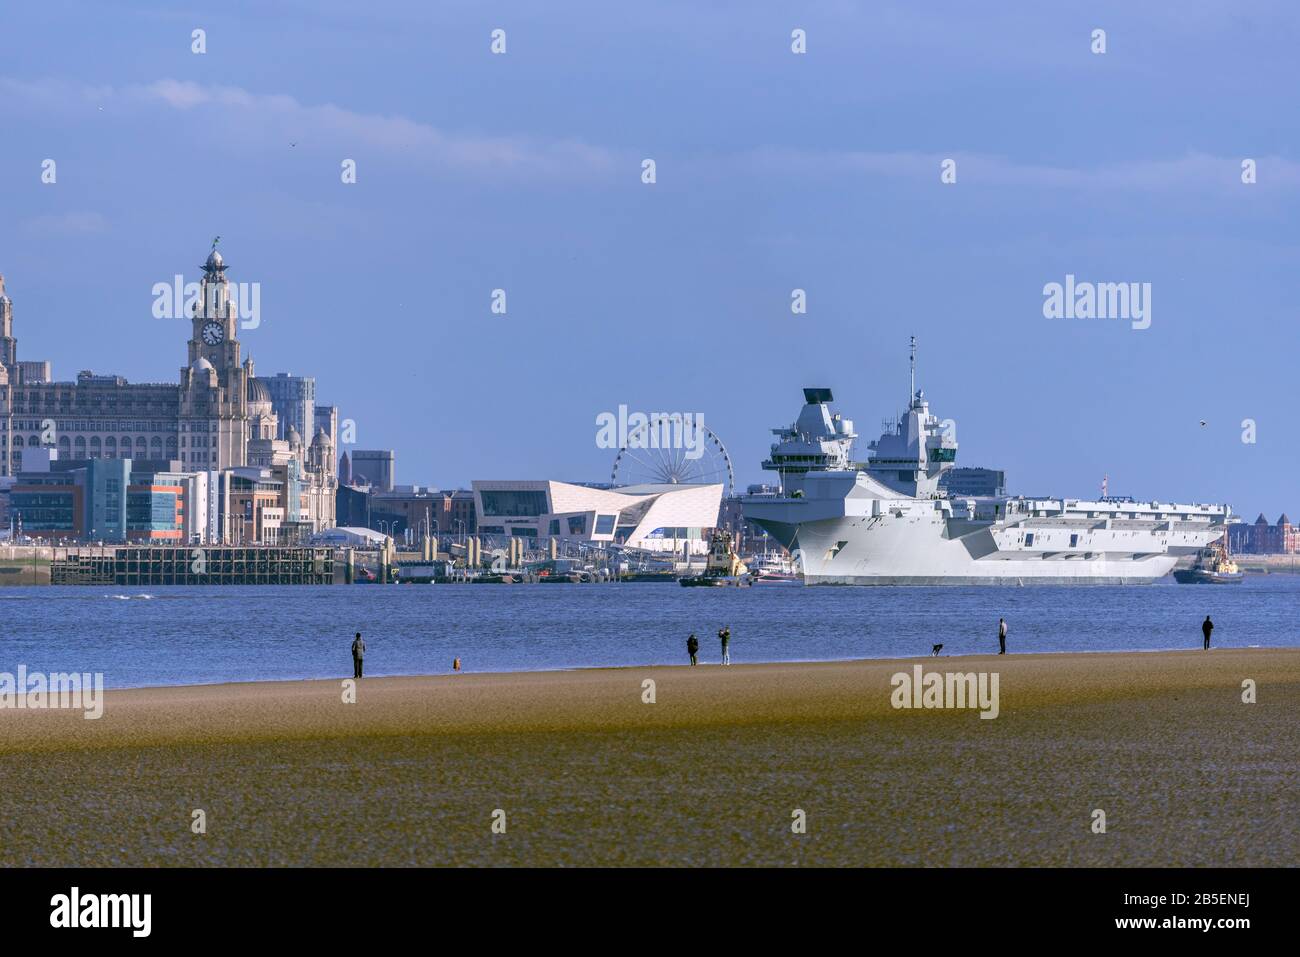 The Royal Navy's latest aircraft carrier HMS Prince of Wales leaves Liverpool pierhead after a week long courtesy visit. Stock Photo